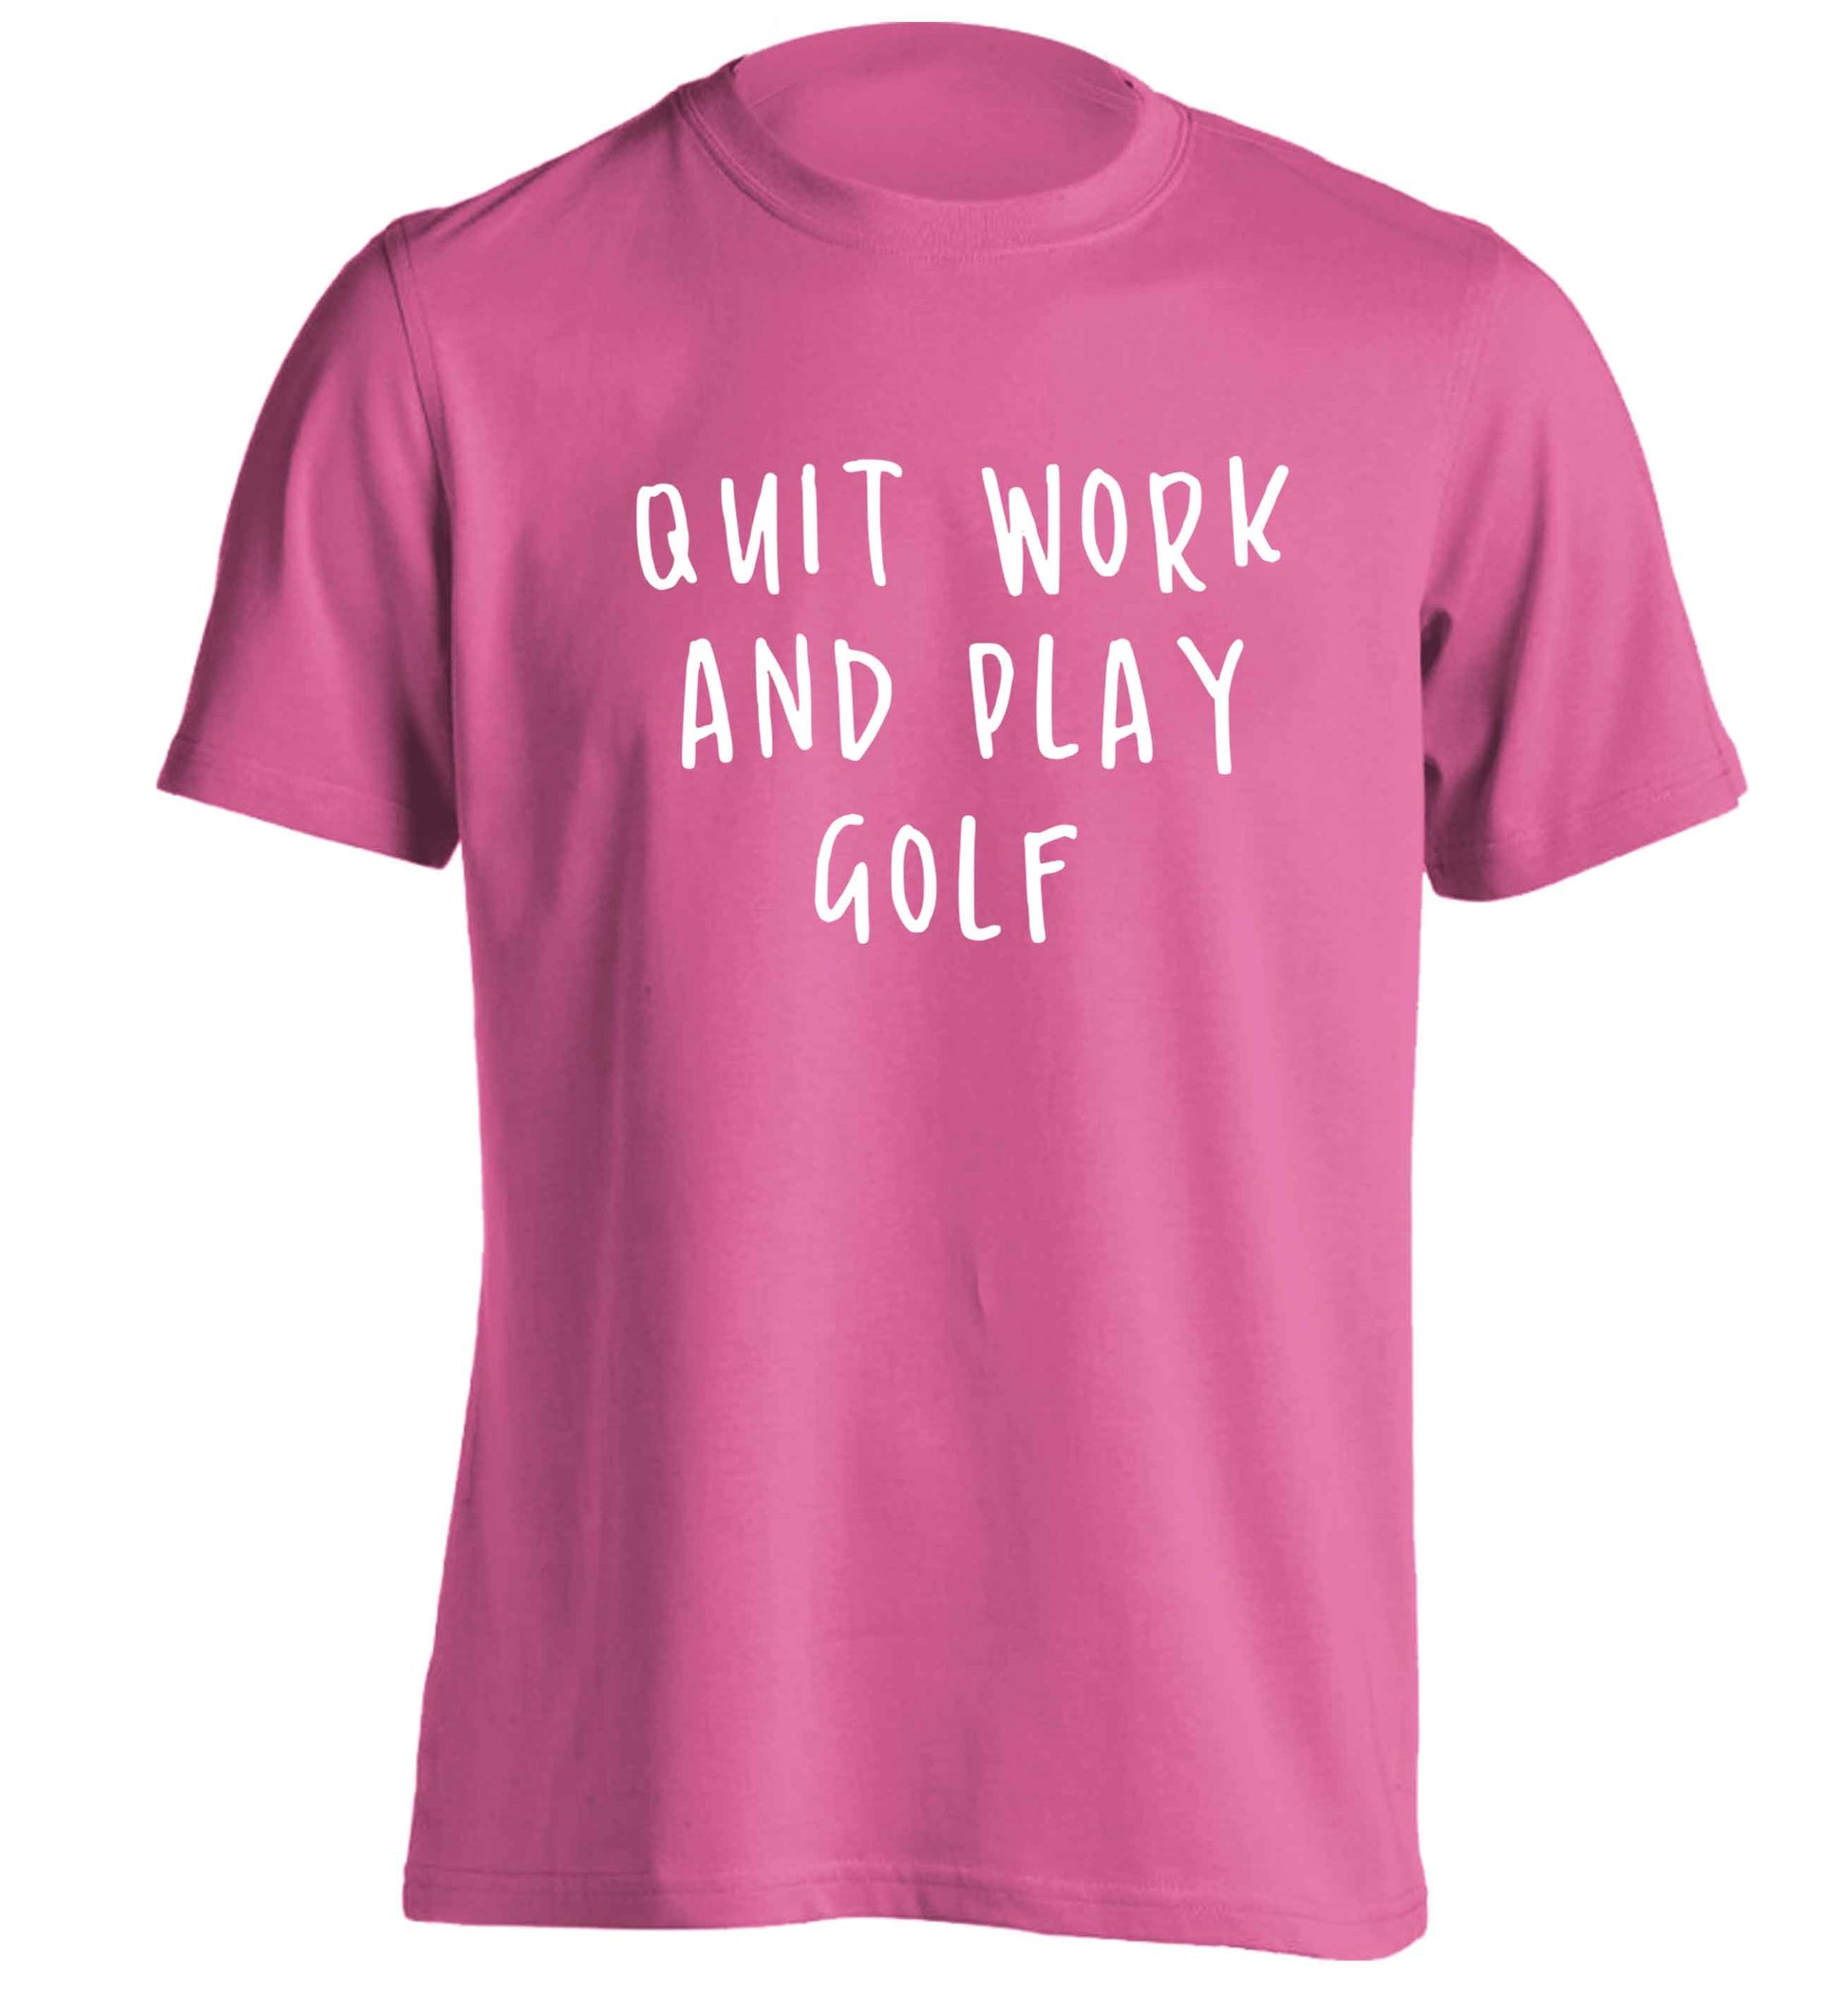 Quit work and play golf adults unisex pink Tshirt 2XL